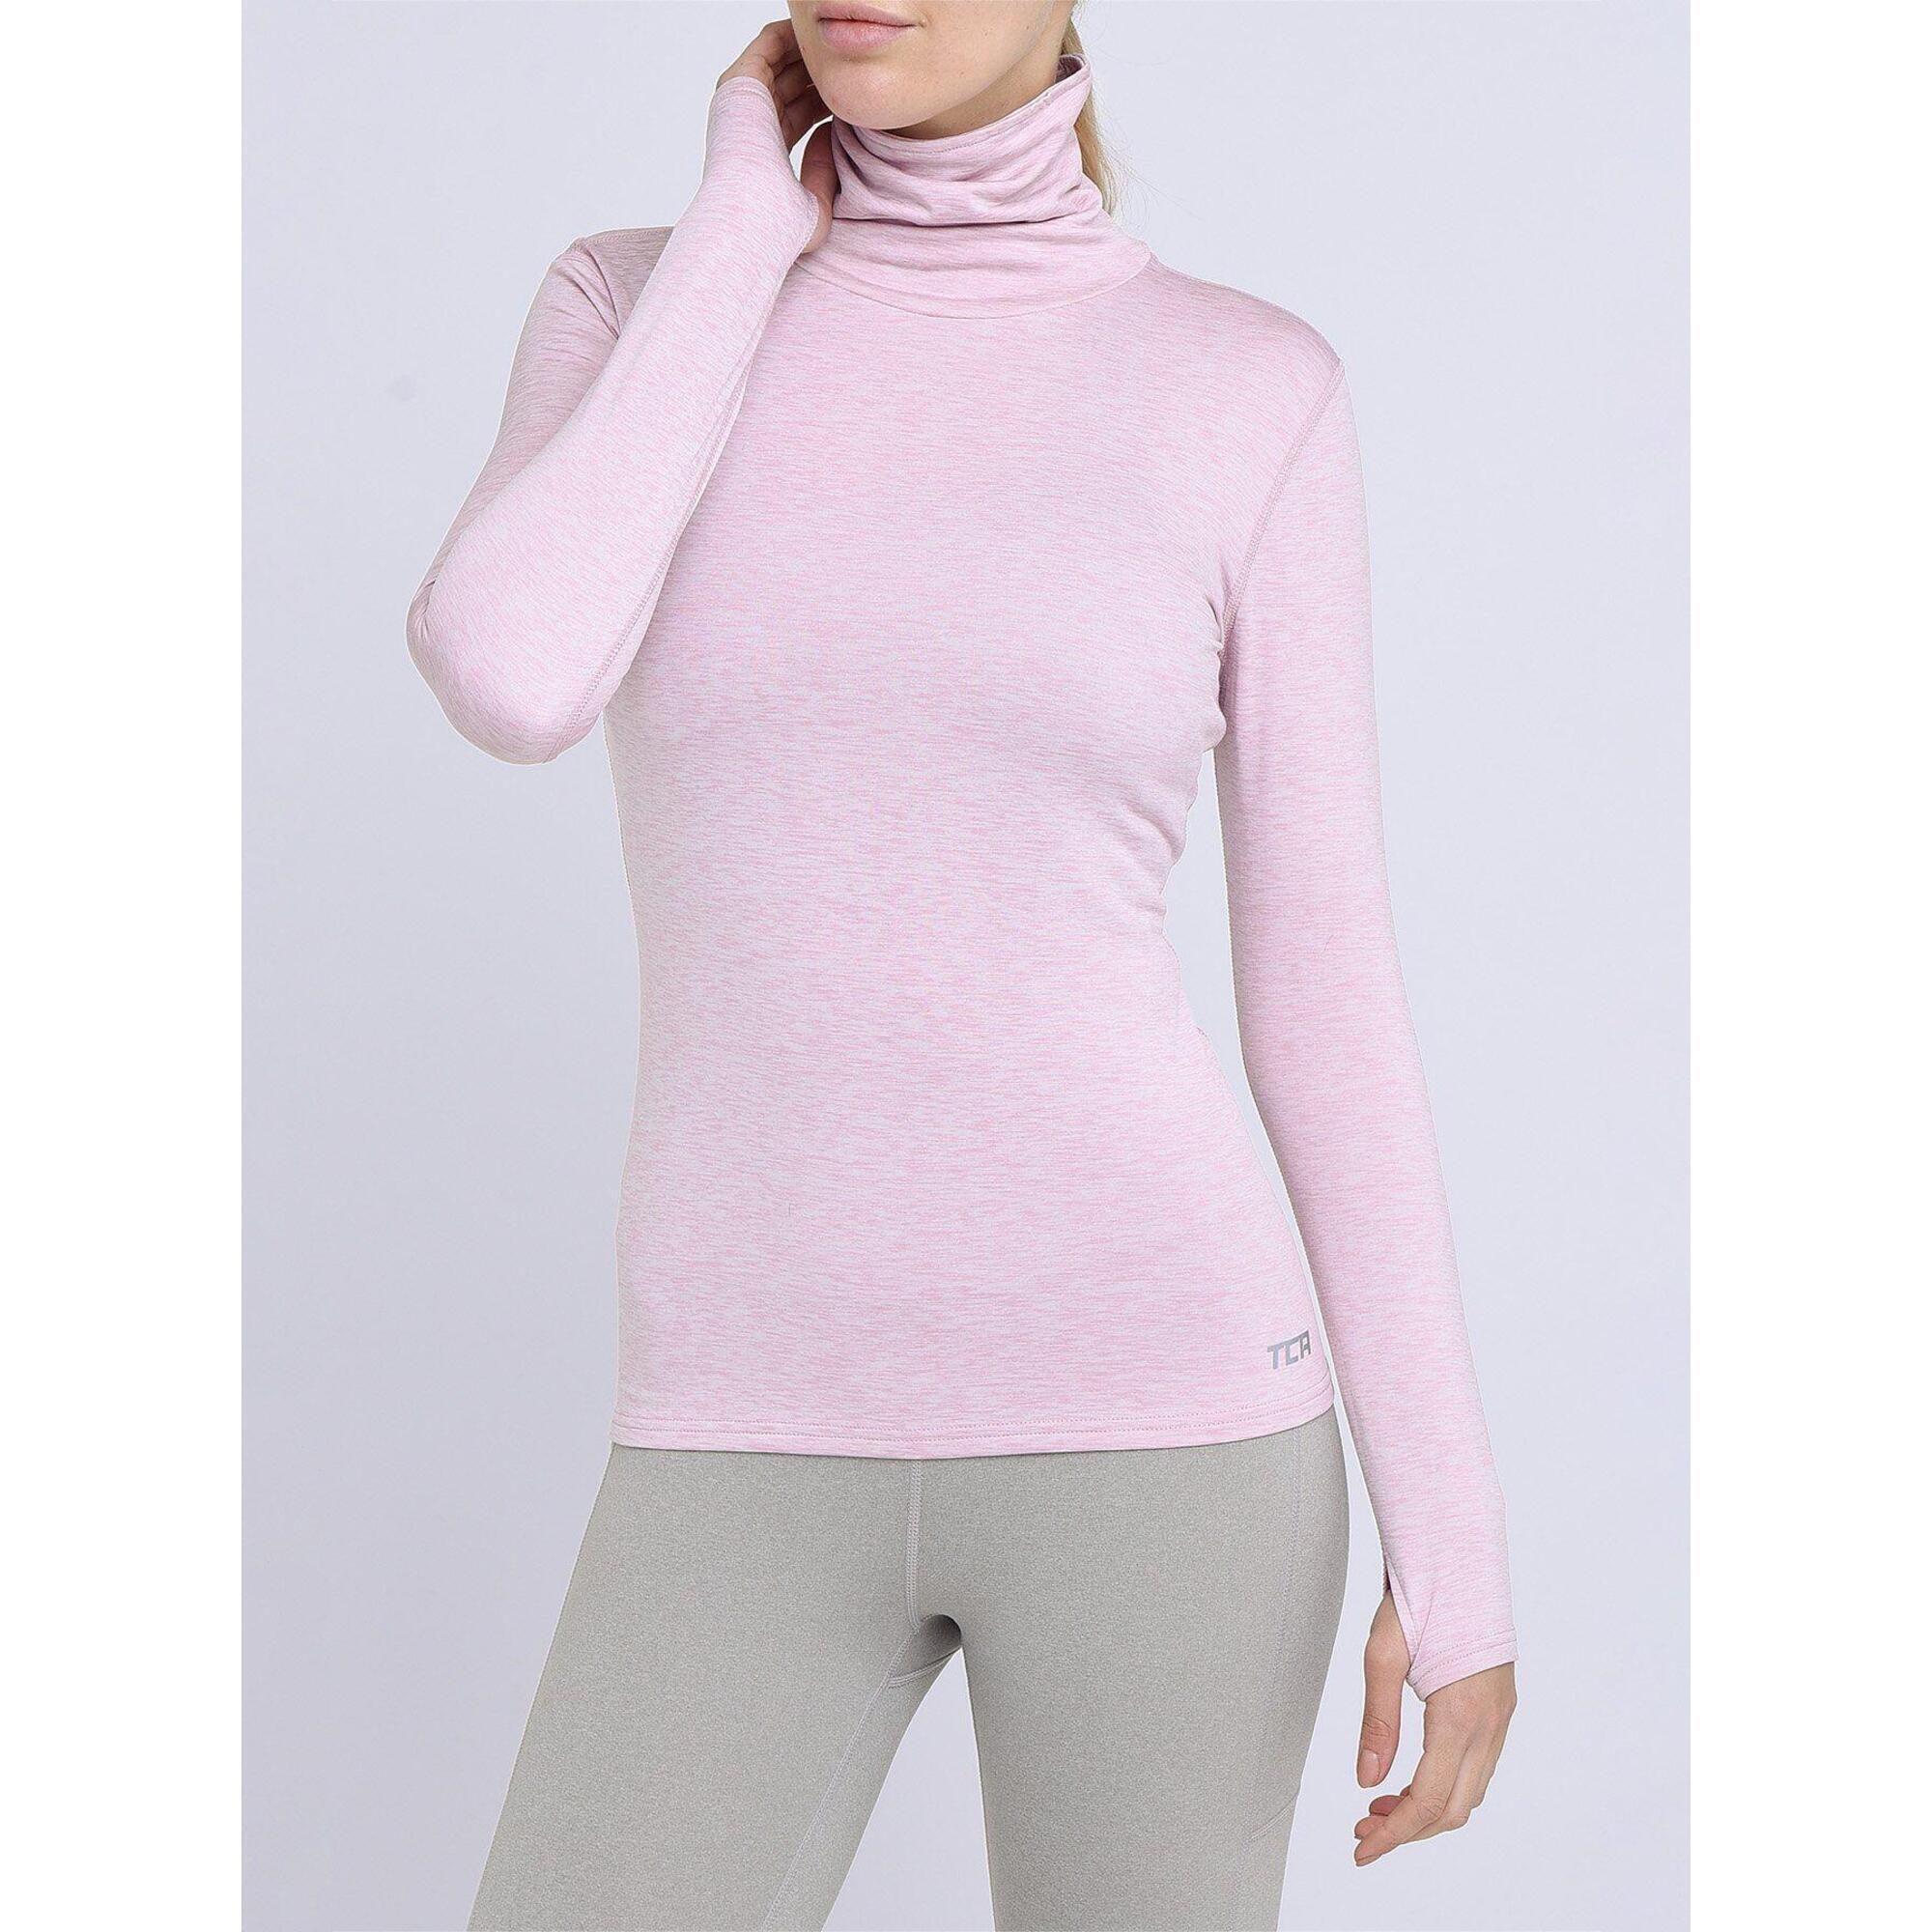 TCA Women's Thermal Funnel Neck Top - Sweet Lilac